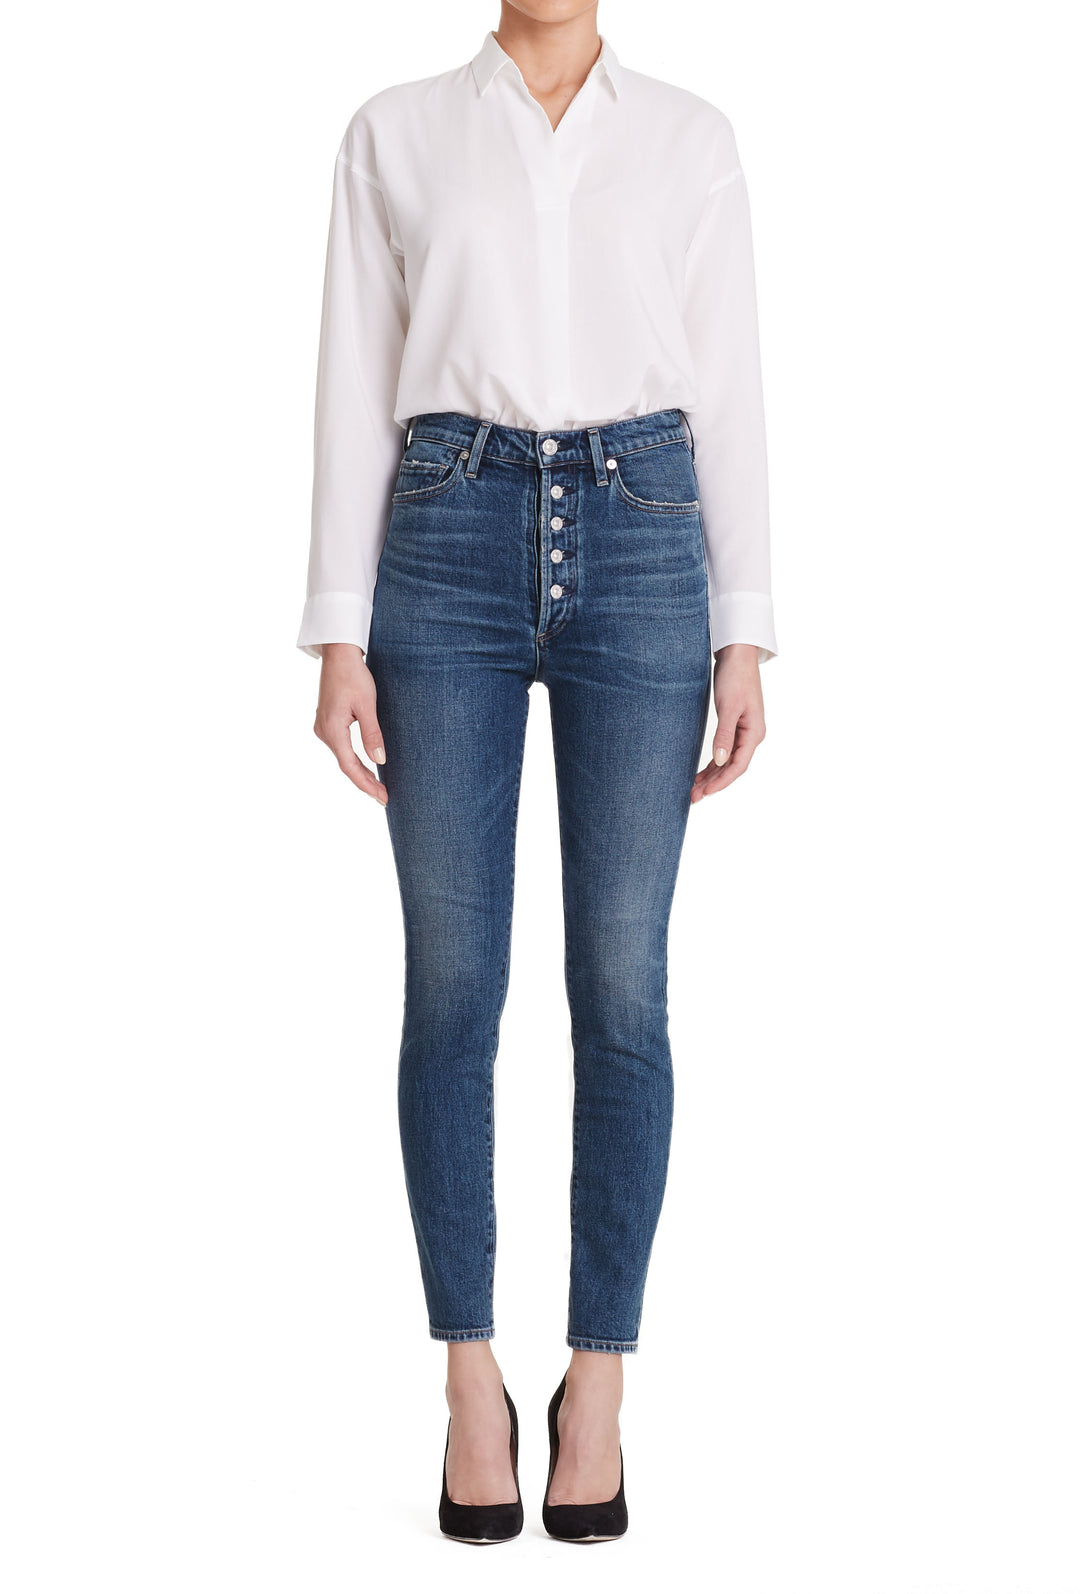 Citizens of Humanity - Olivia Exposed Fly High-Rise Slim Ankle Jeans in Circa wash